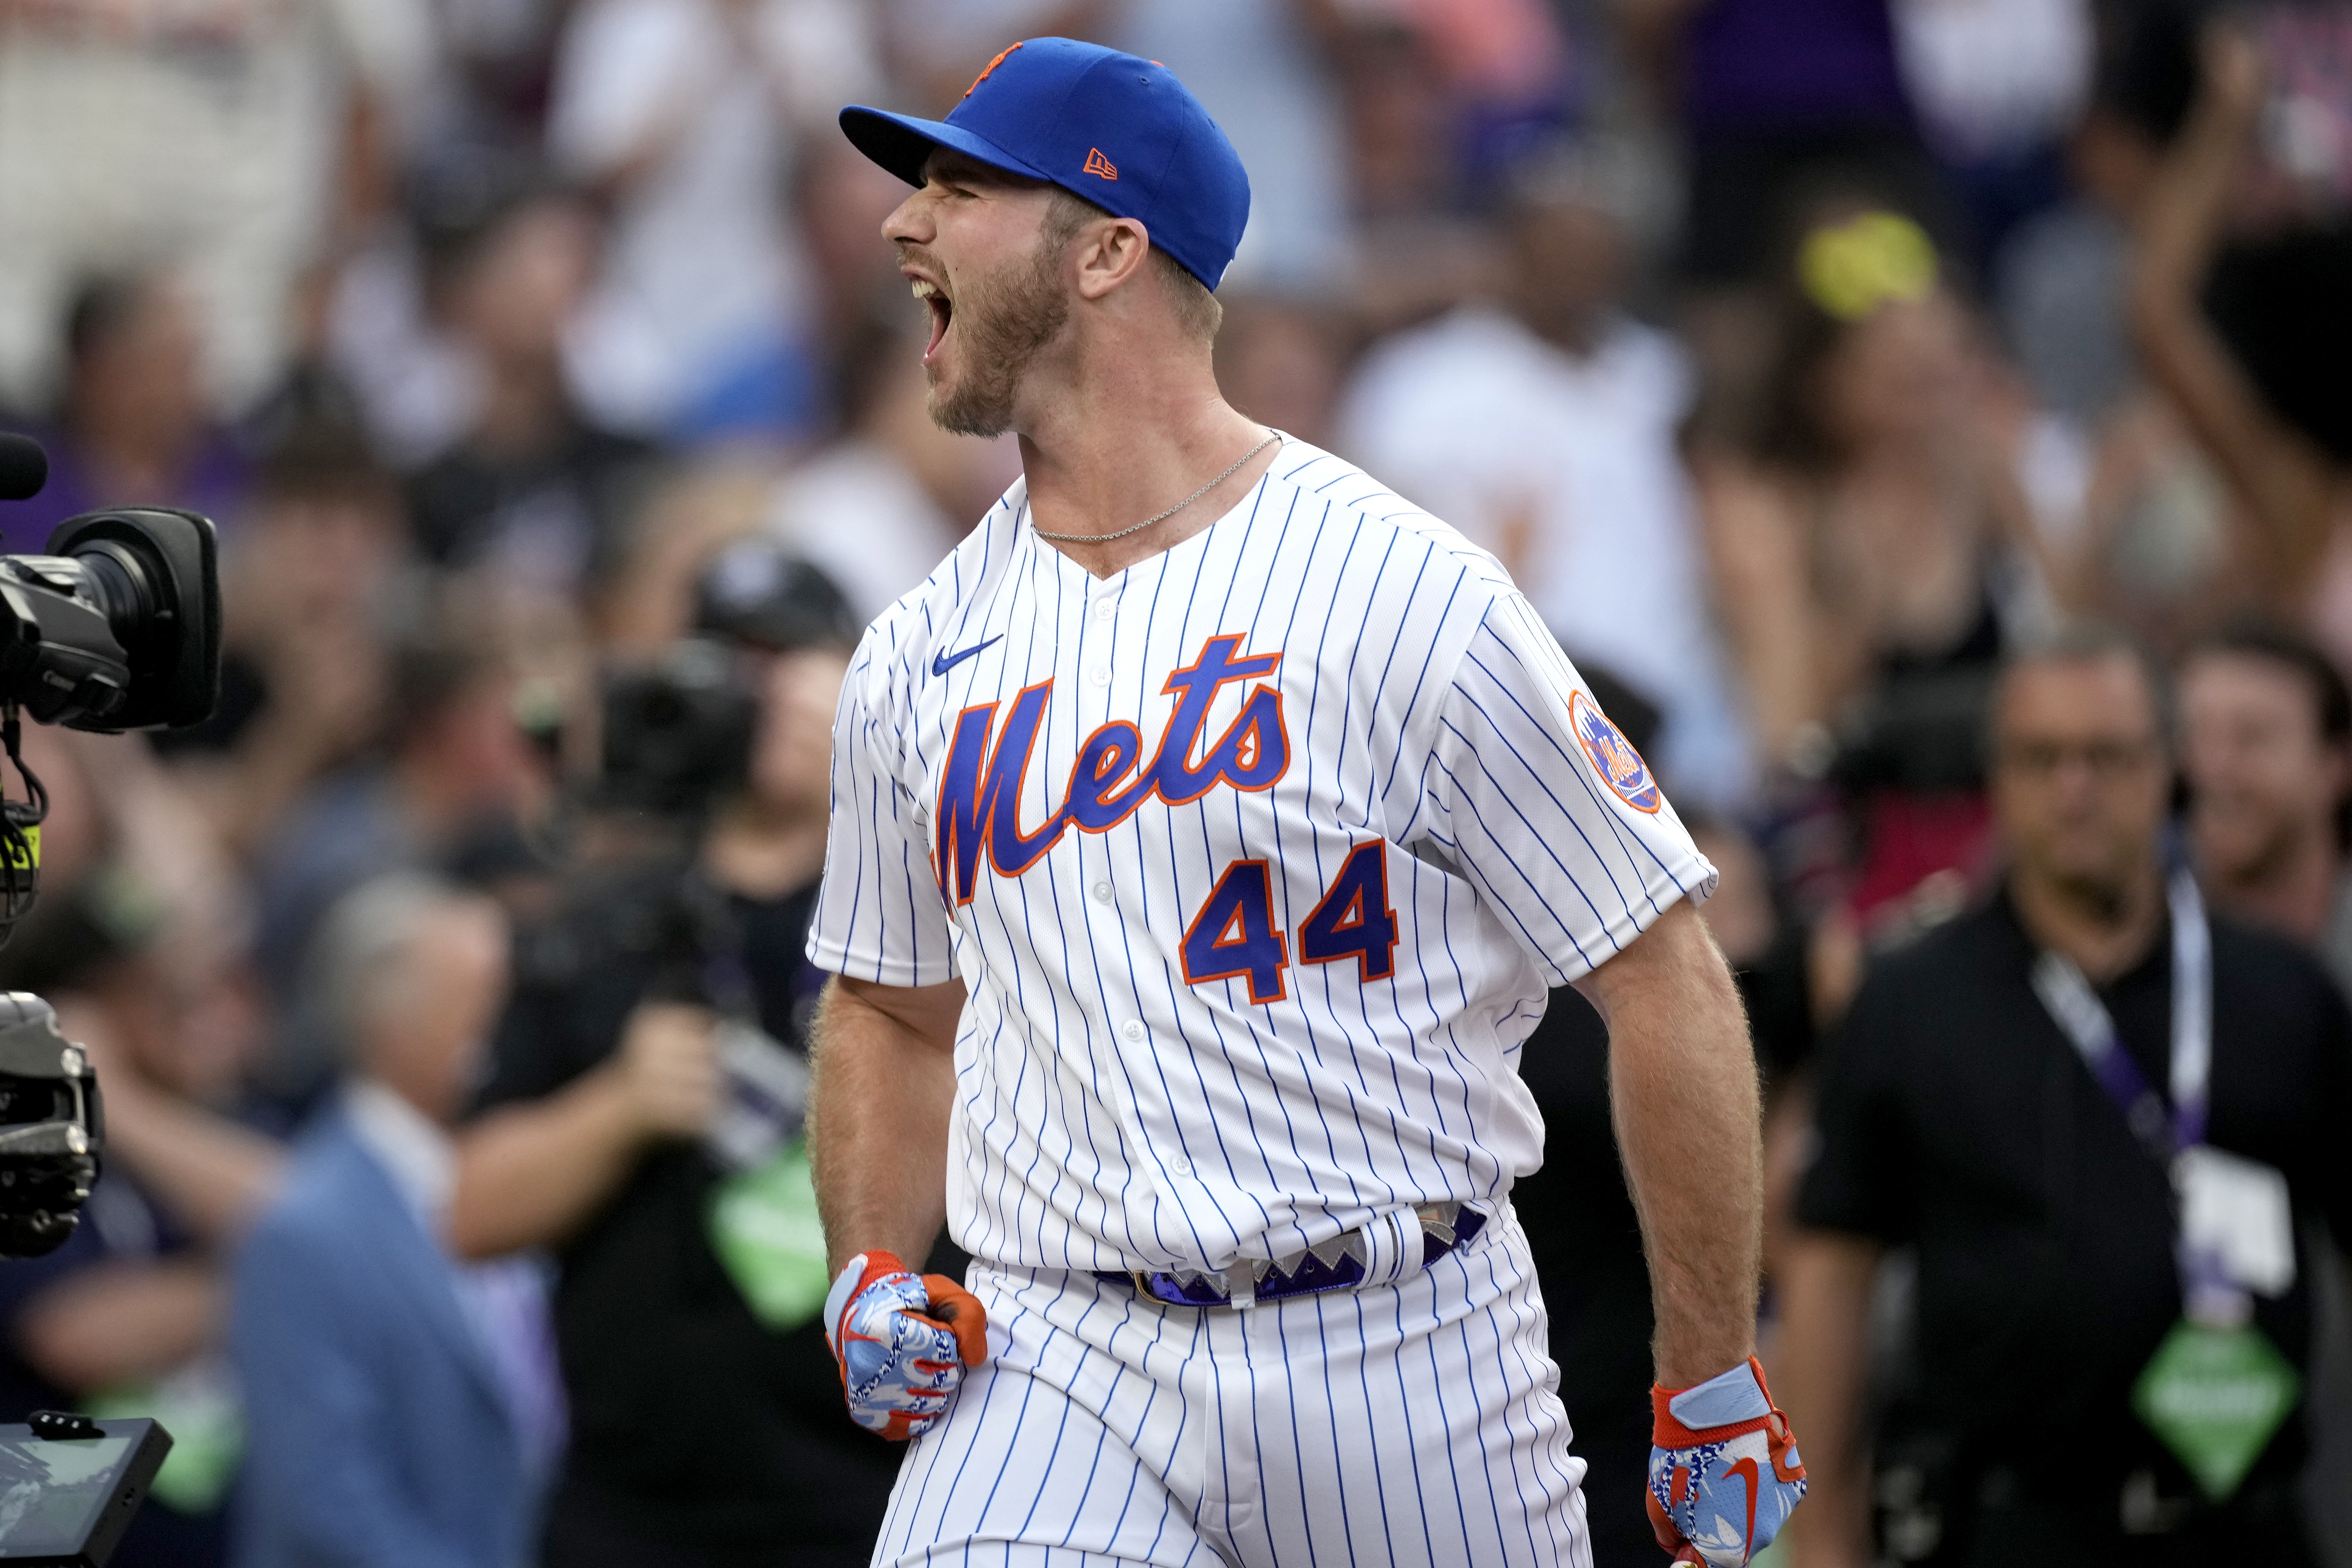 Pete Alonso will participate in 2019 Home Run Derby – New York Daily News